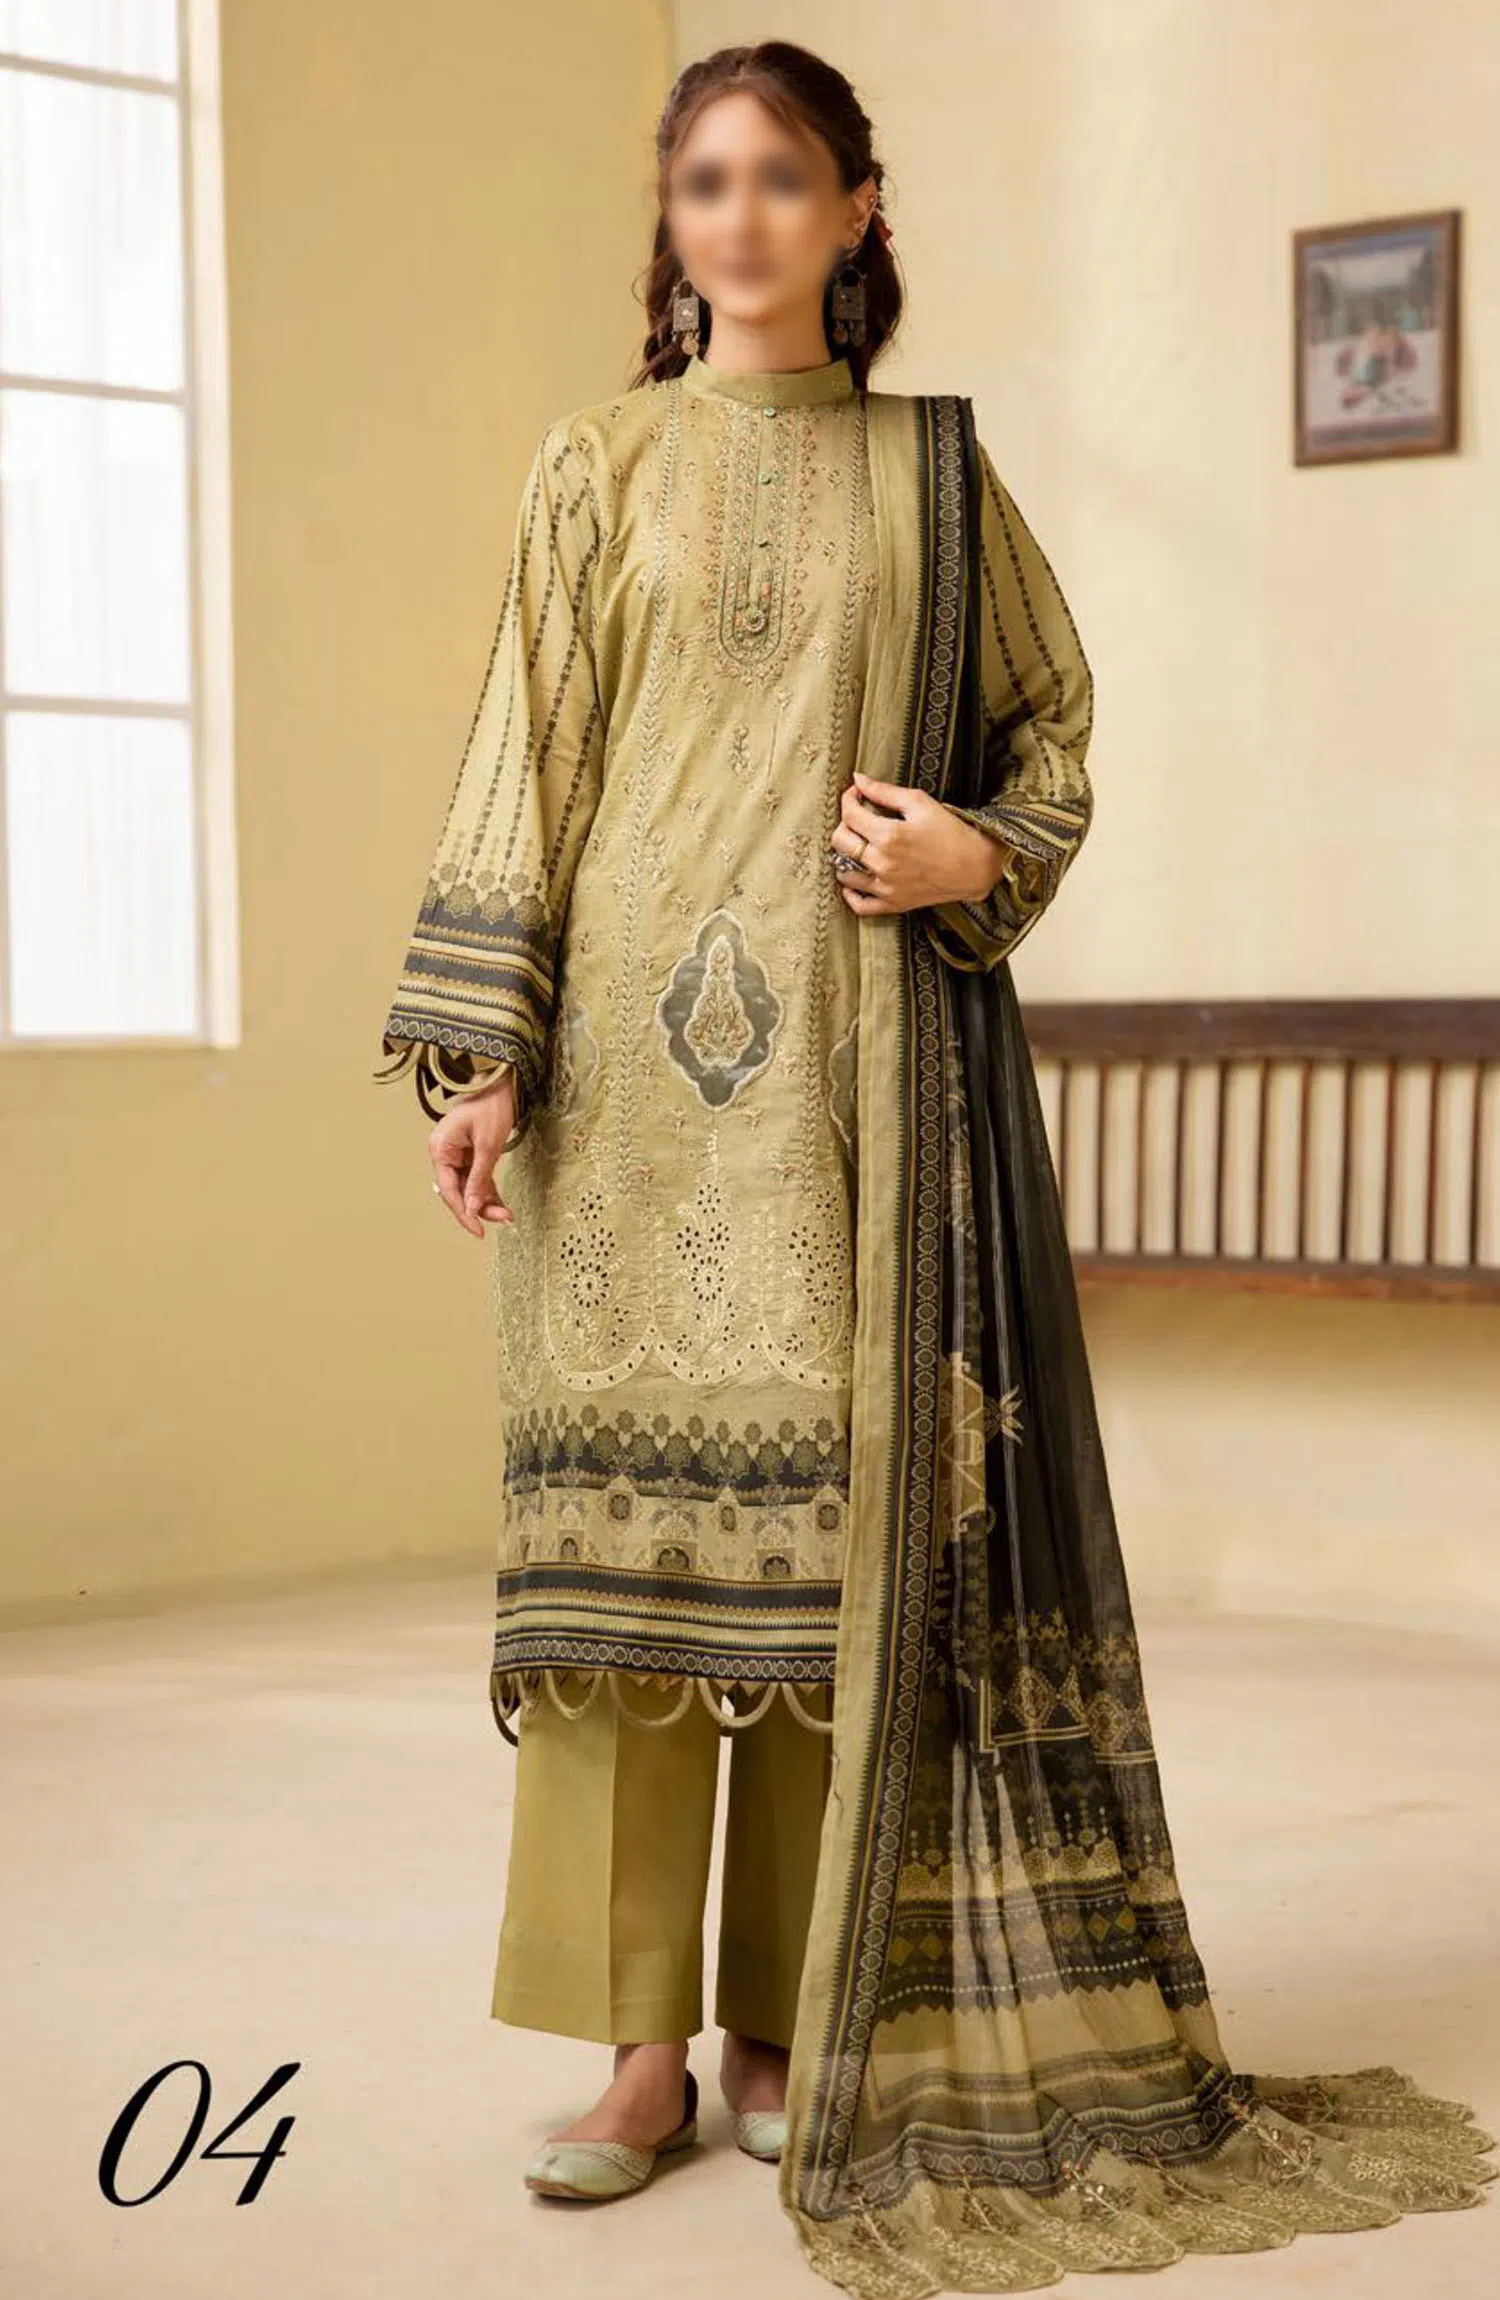 Mahees Ghazal Embroidered Lawn with Emb Voile Dupatta Collection - Design 04